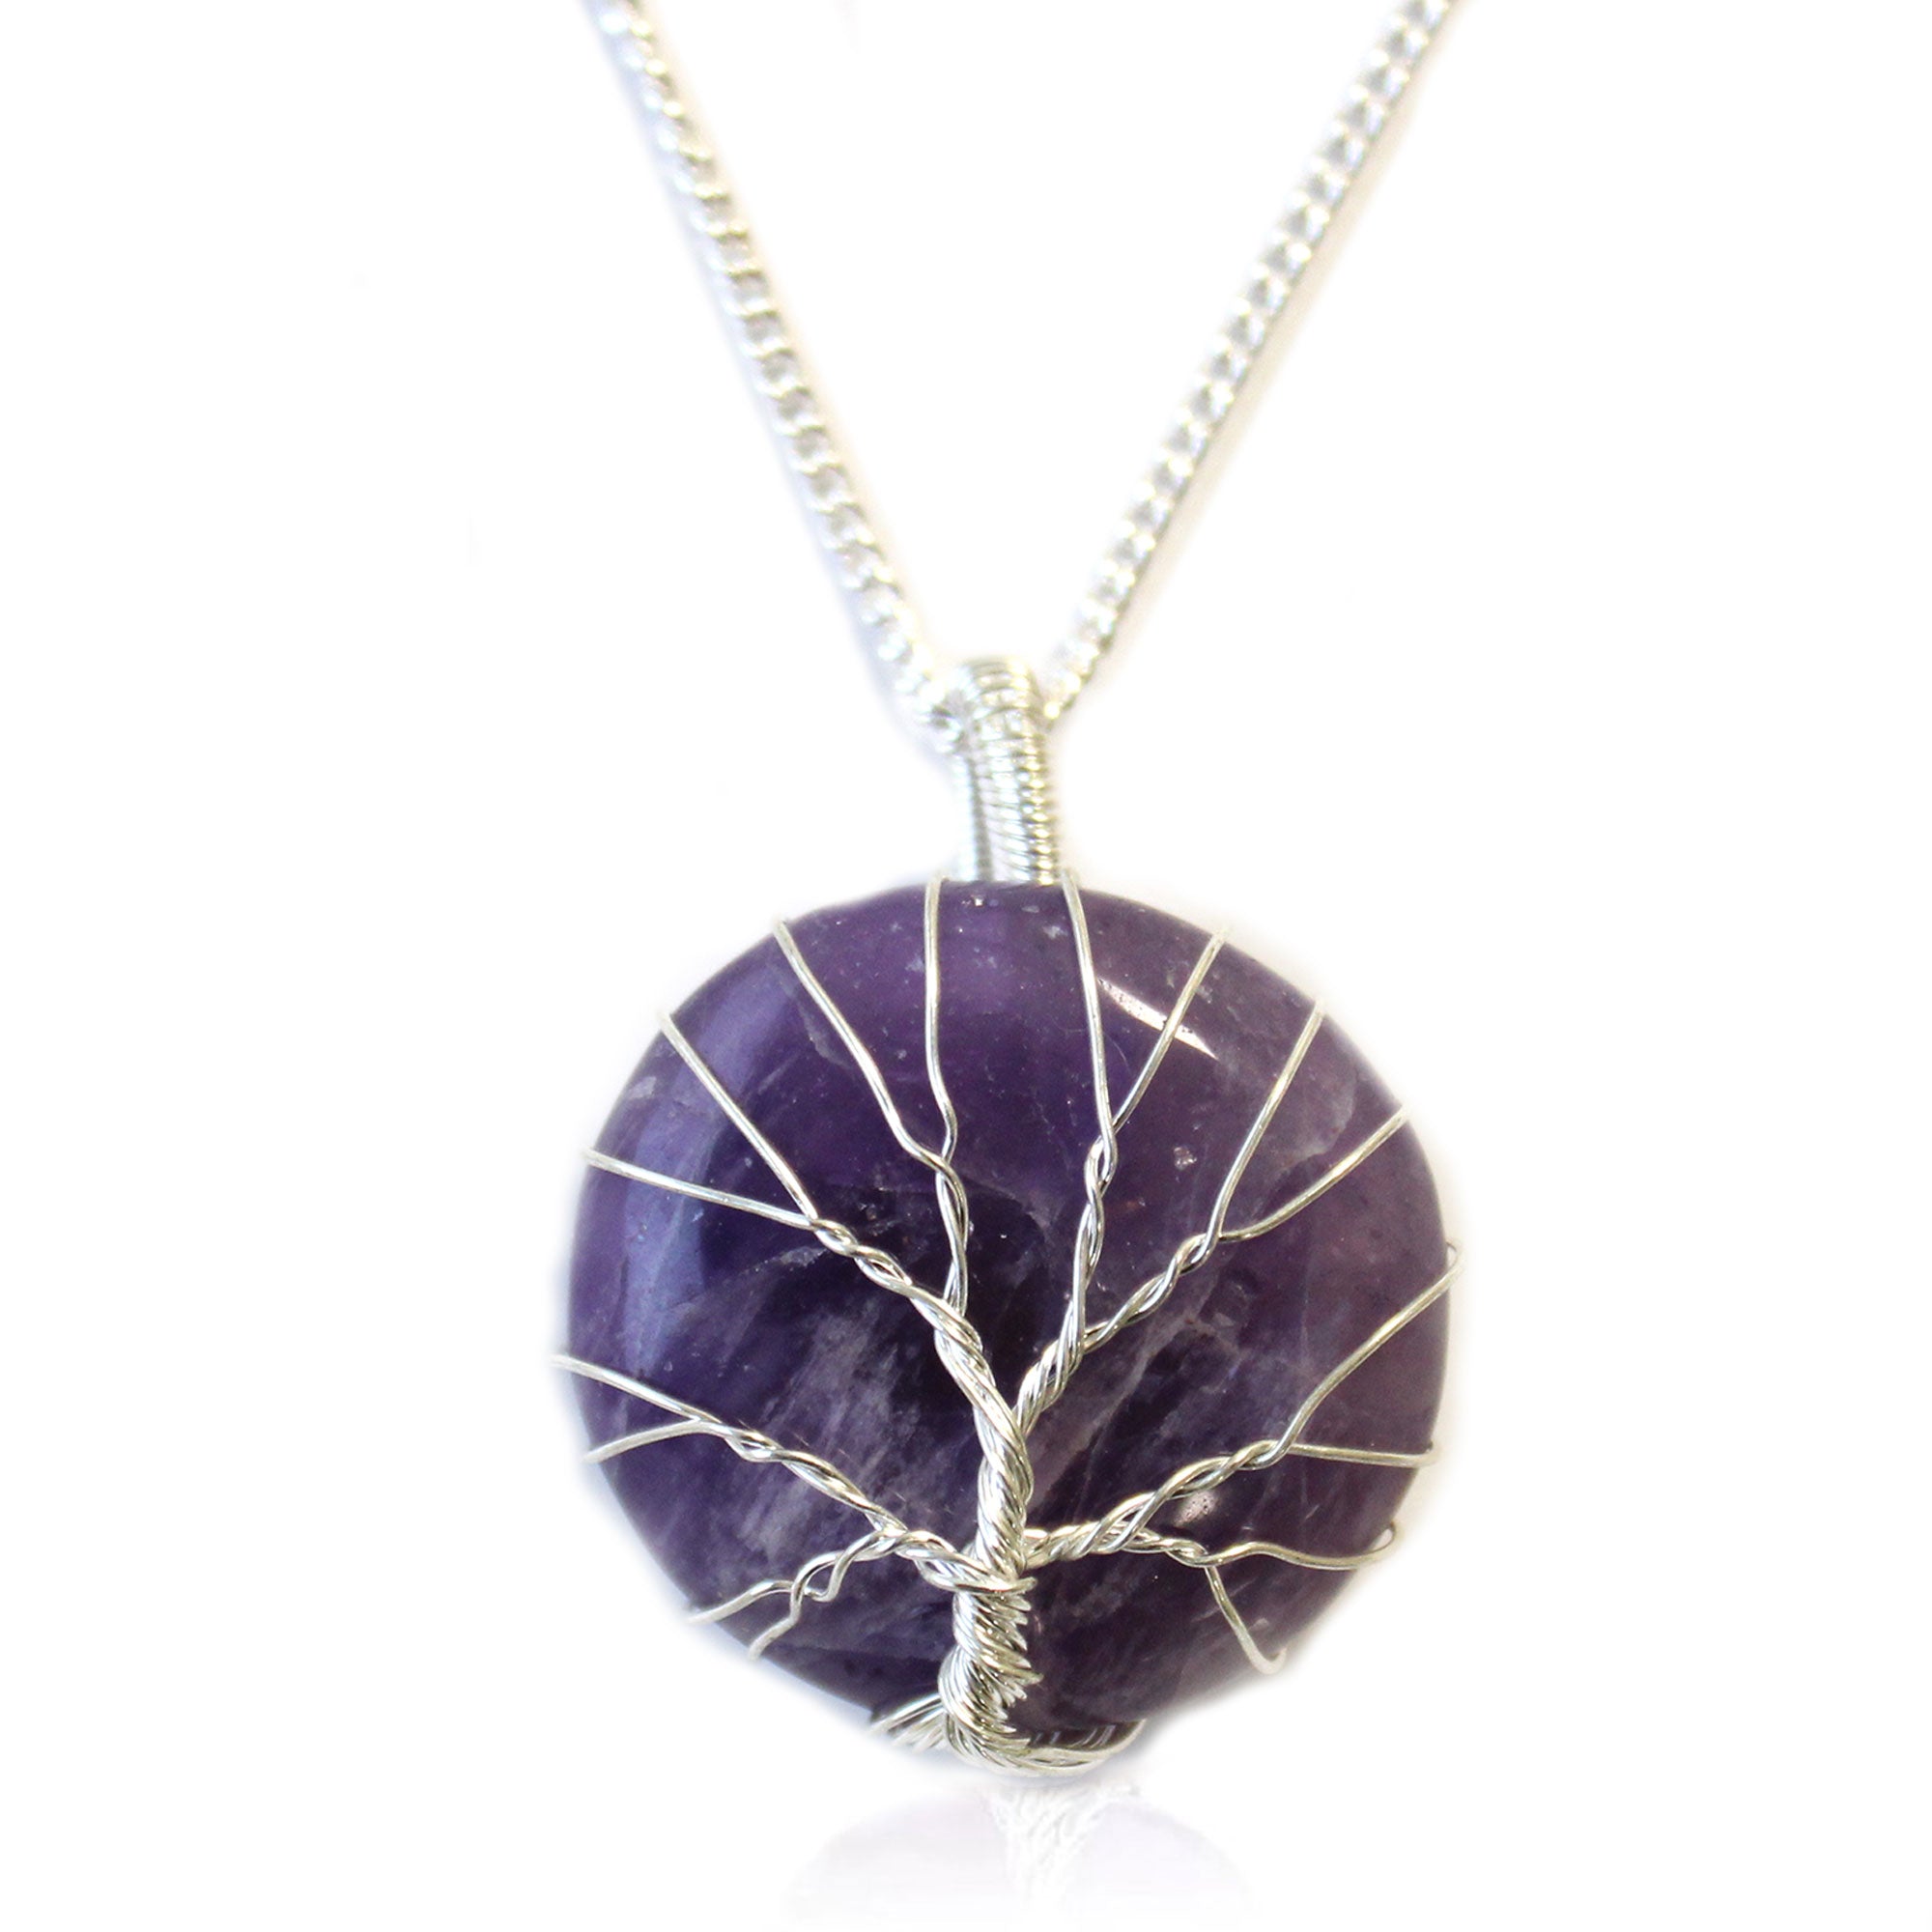 View Tree of Life Gemstone Necklace Amethyst information